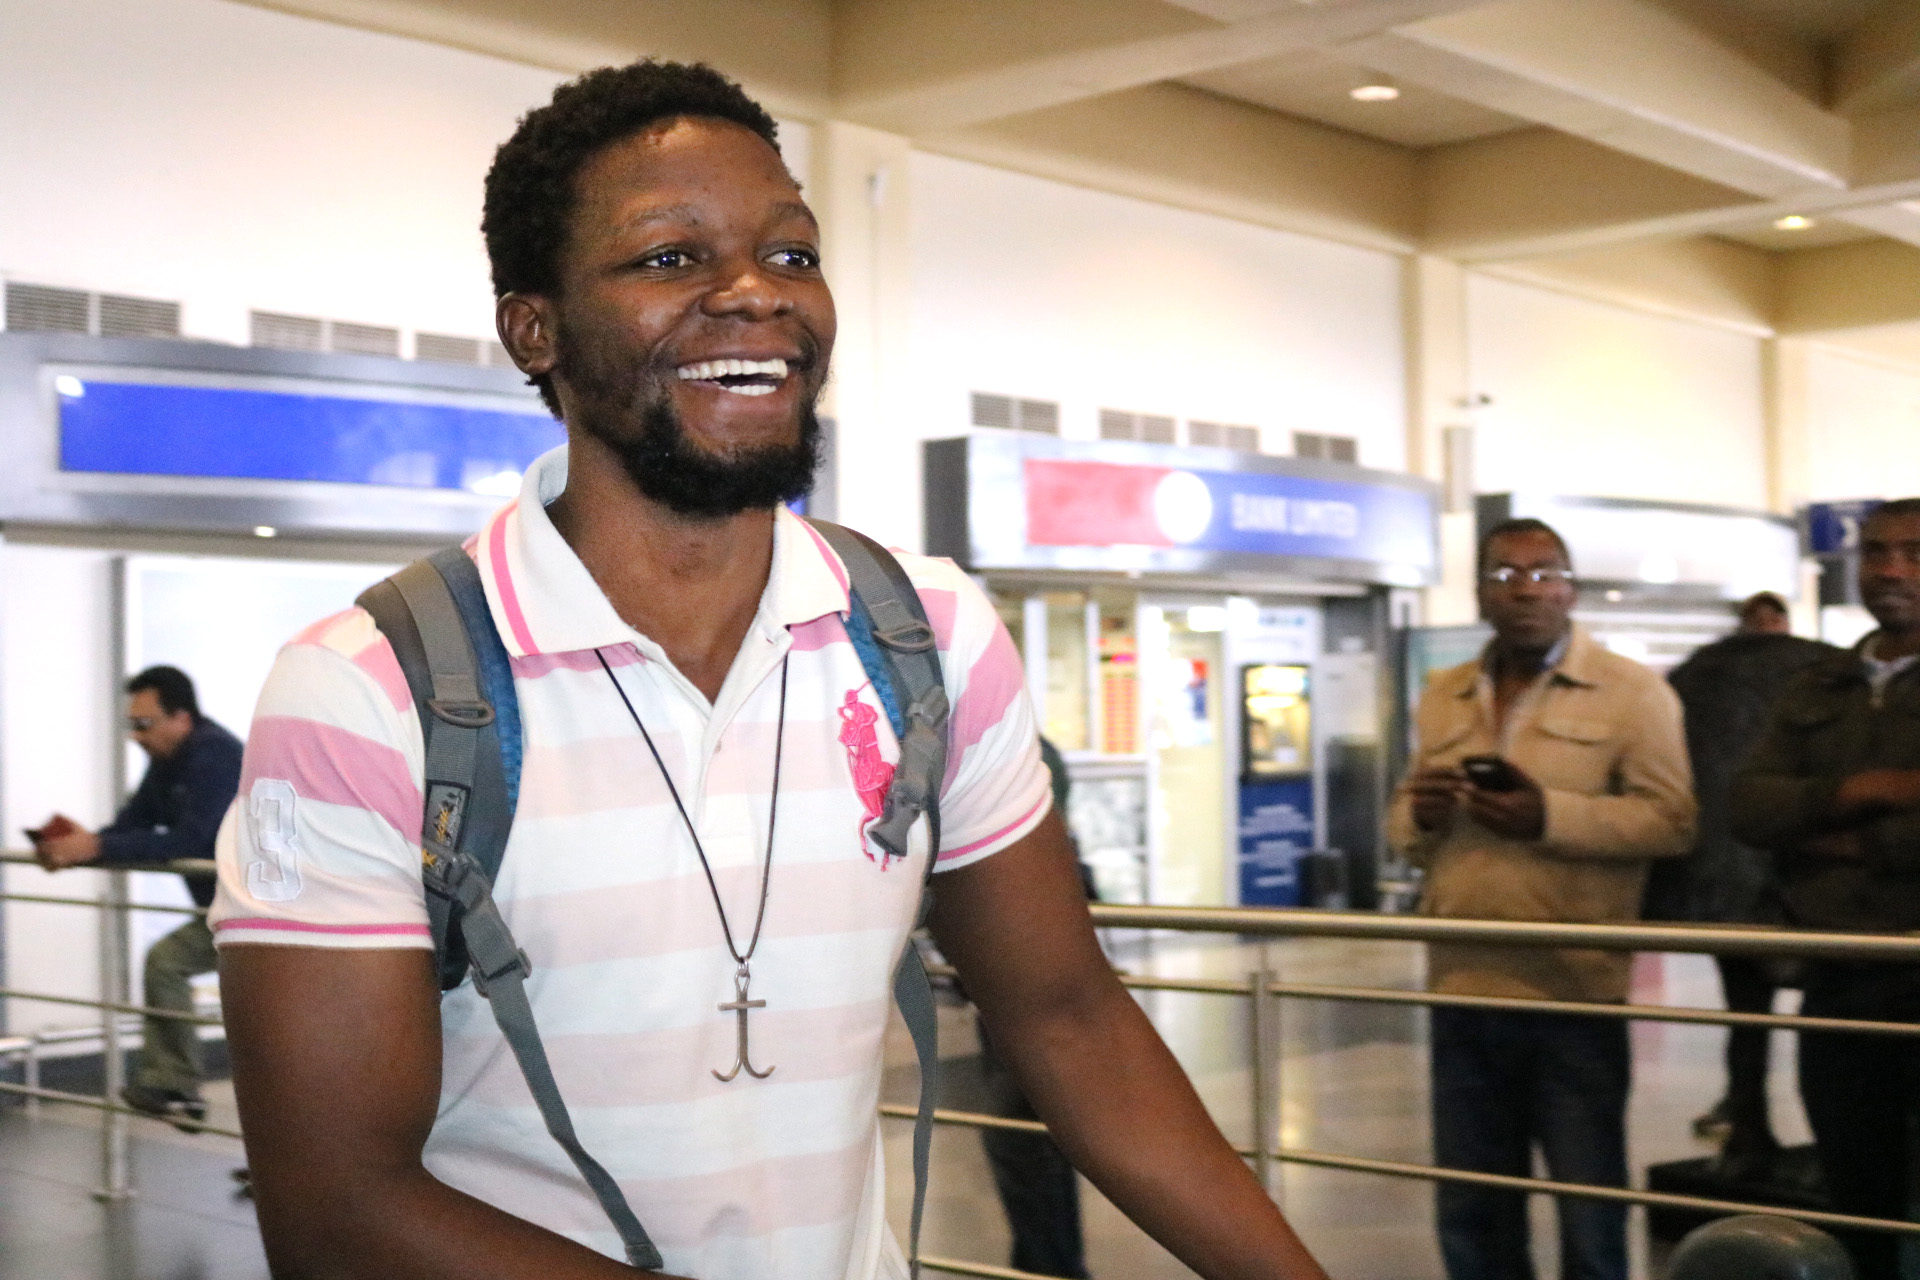 Tawanda Chandiwana exhibits a broad smile as he arrives back home in Zimbabwe in July, 2018, after a 56-day detention in the Philippines. The 13 agencies of The United Methodist Church are pursuing further accomplishments in 2019. File photo by Taurai Emmanuel Maforo, UMNS.